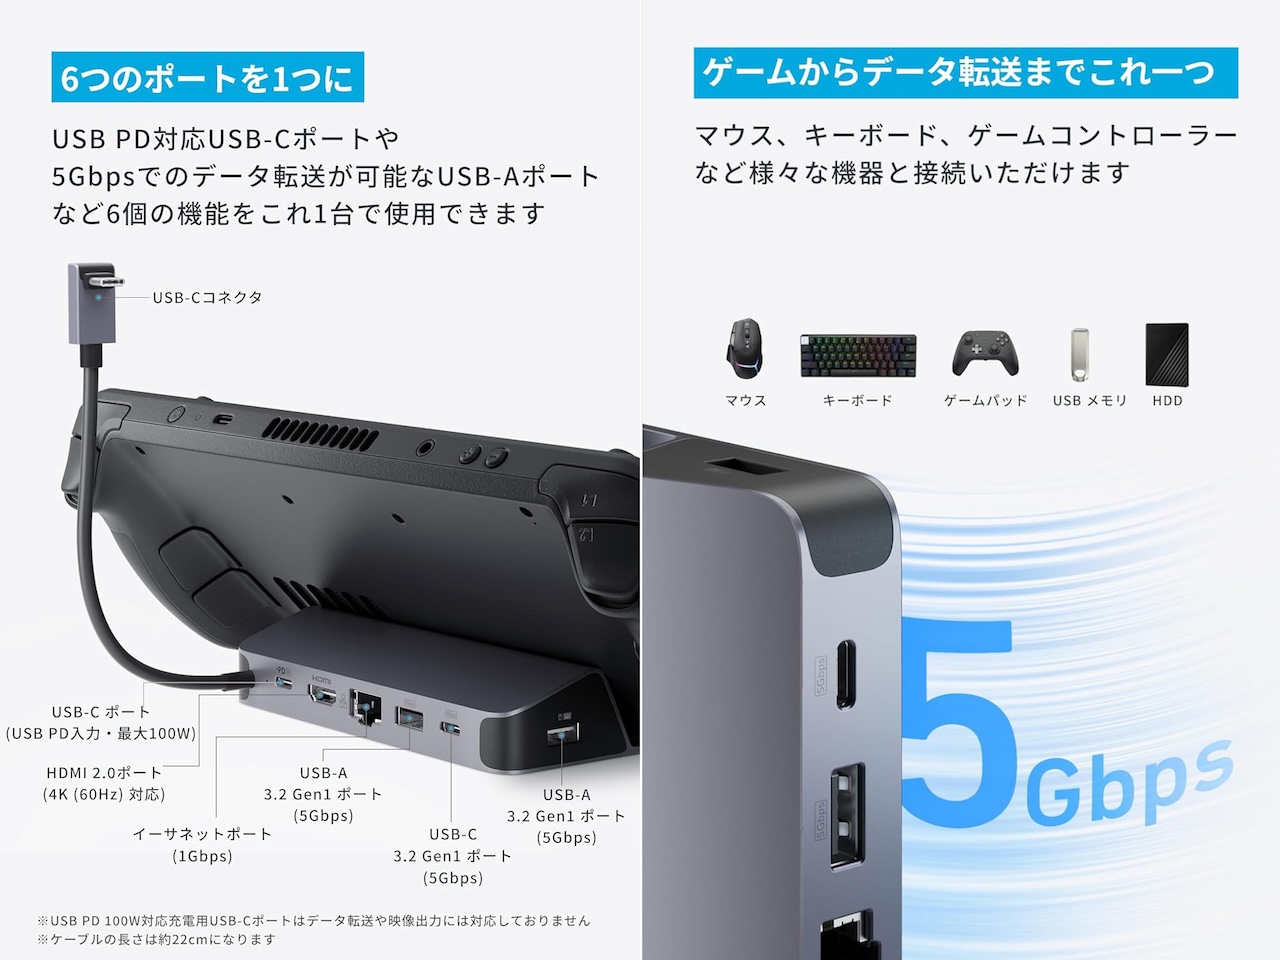 Anker USB-C ハブ (6-in-1, For Game Console)